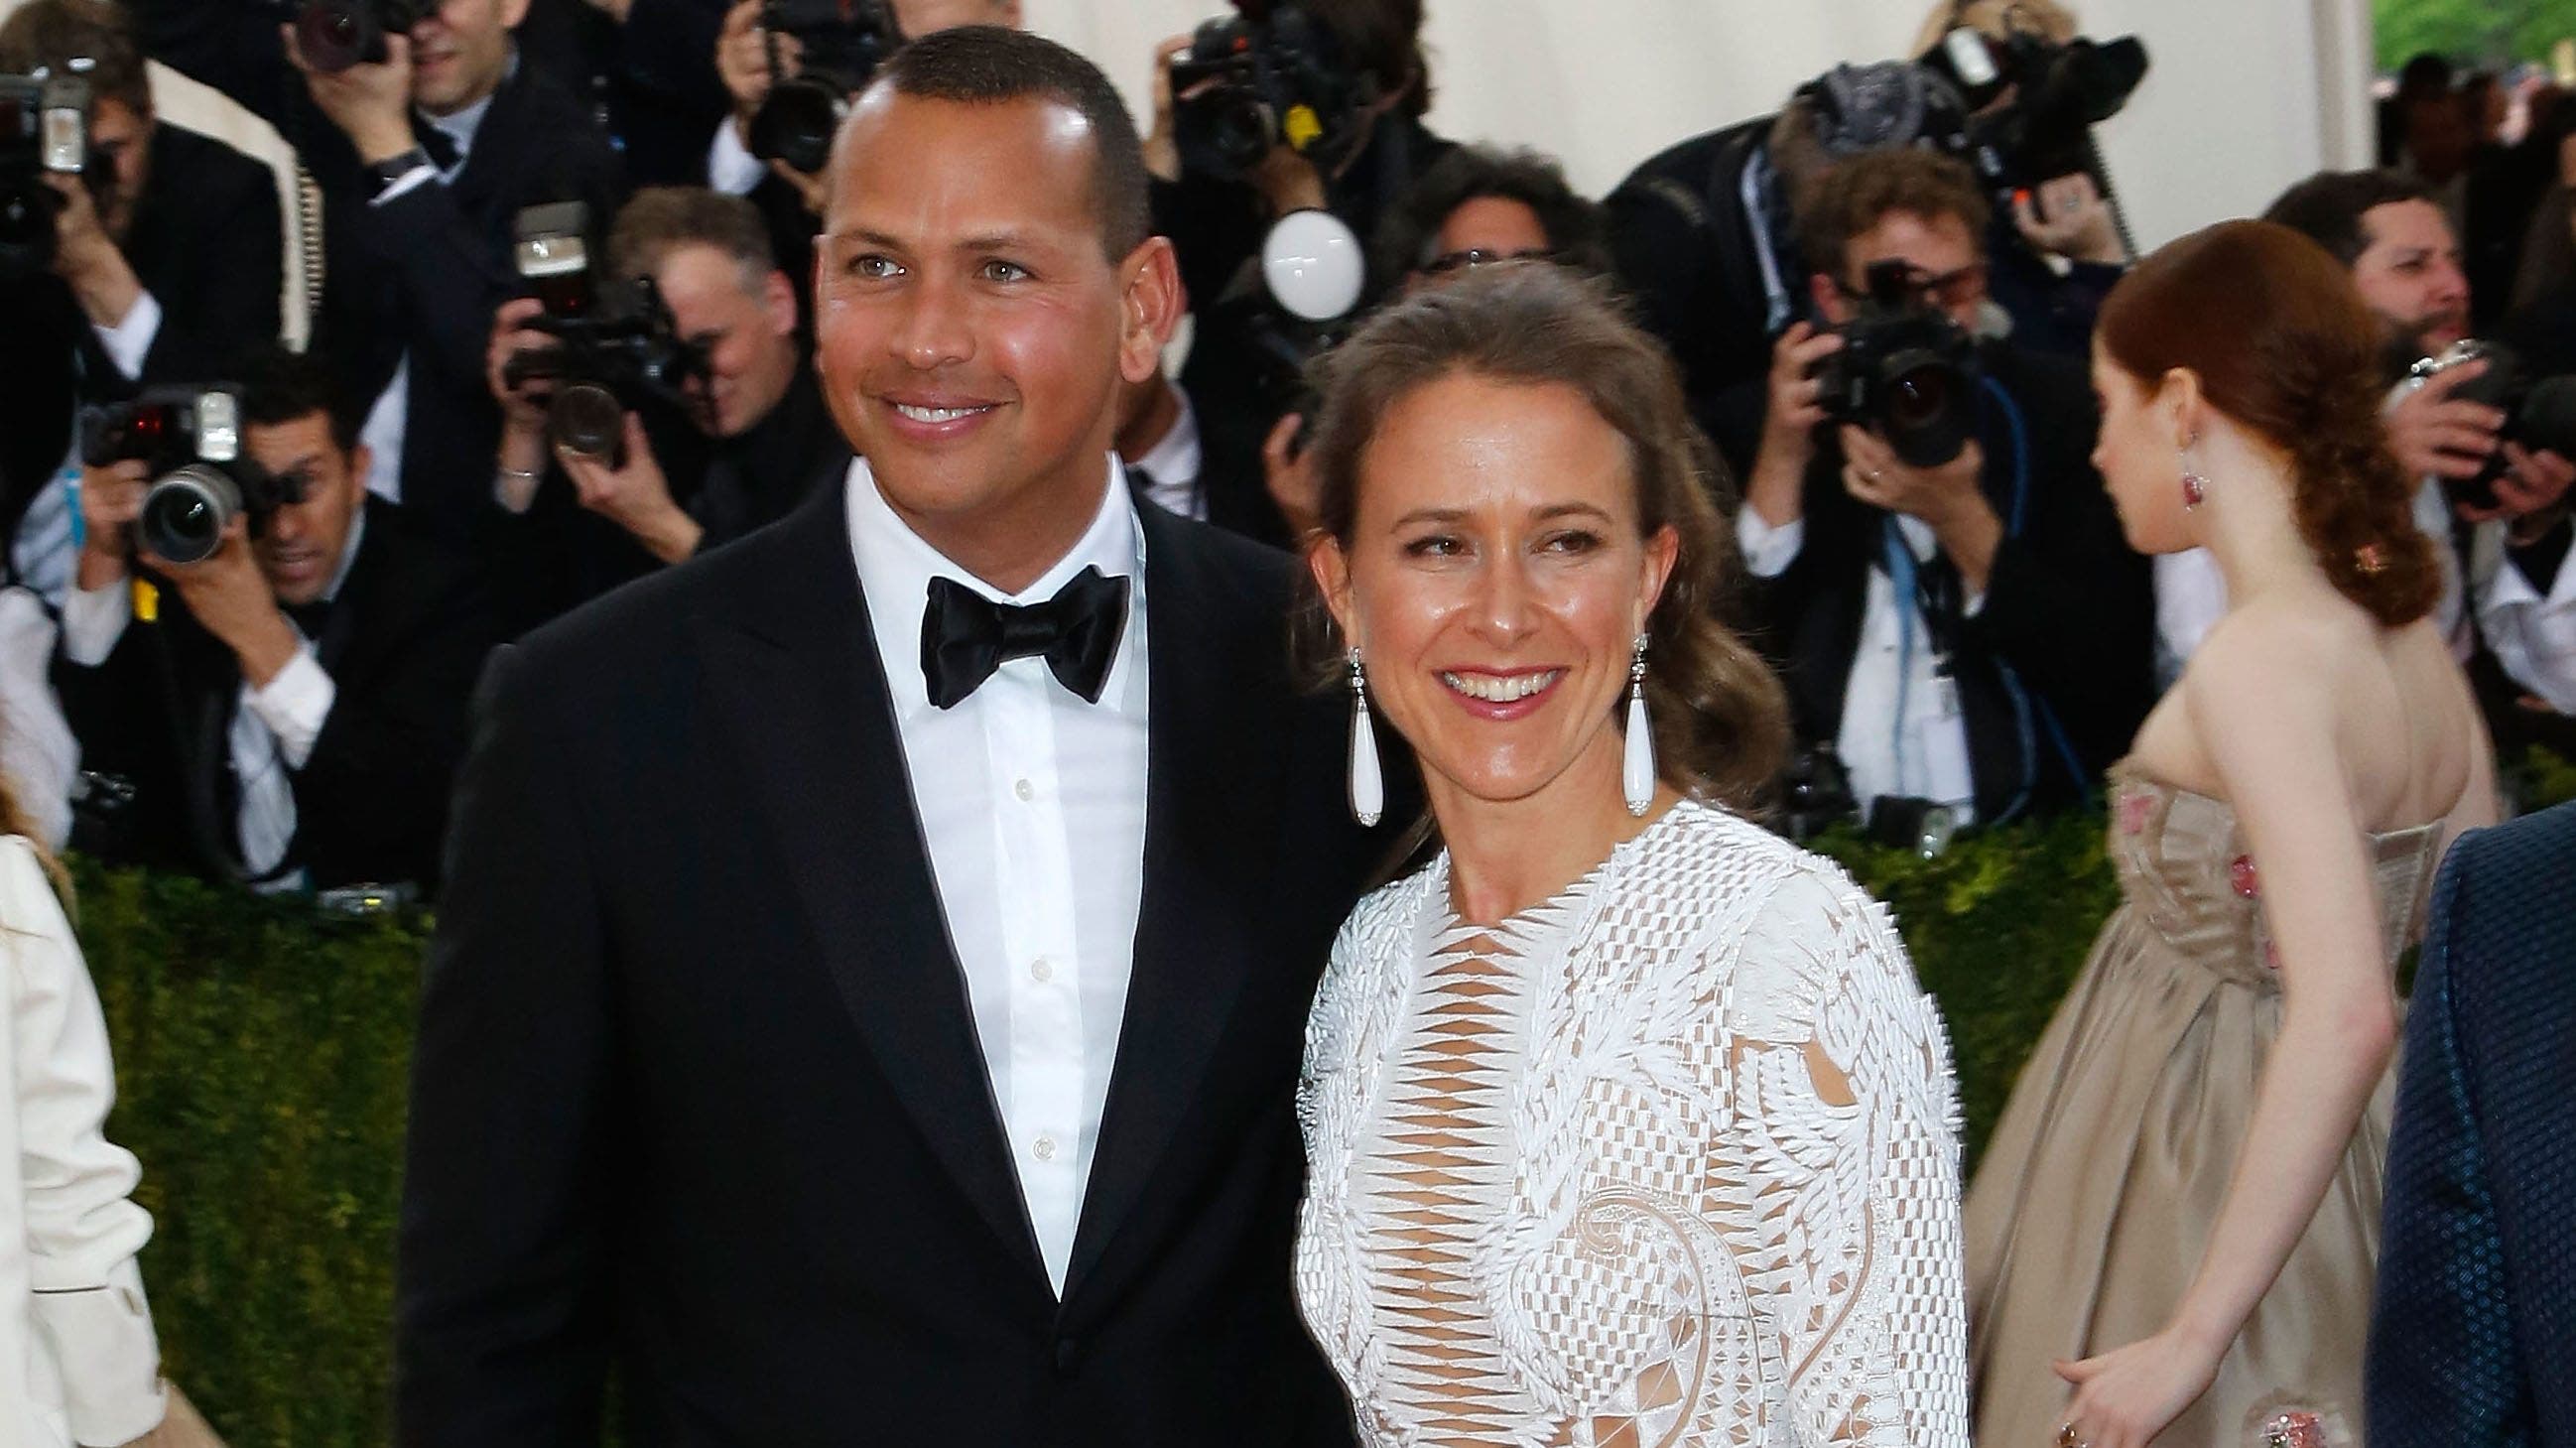 Alex Rodriguez and his arm candy through the years